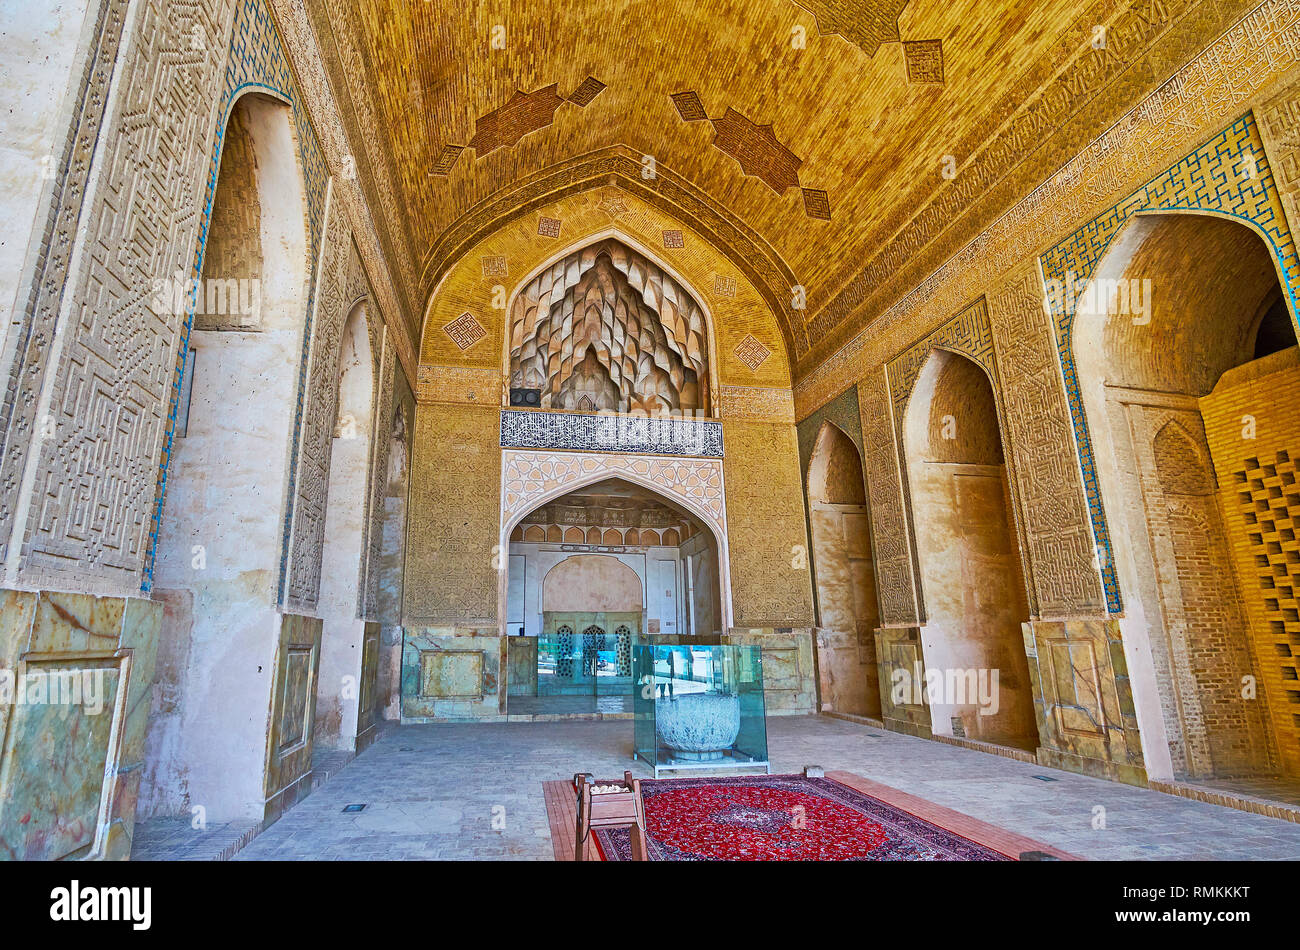 Mein chat portal in Isfahan